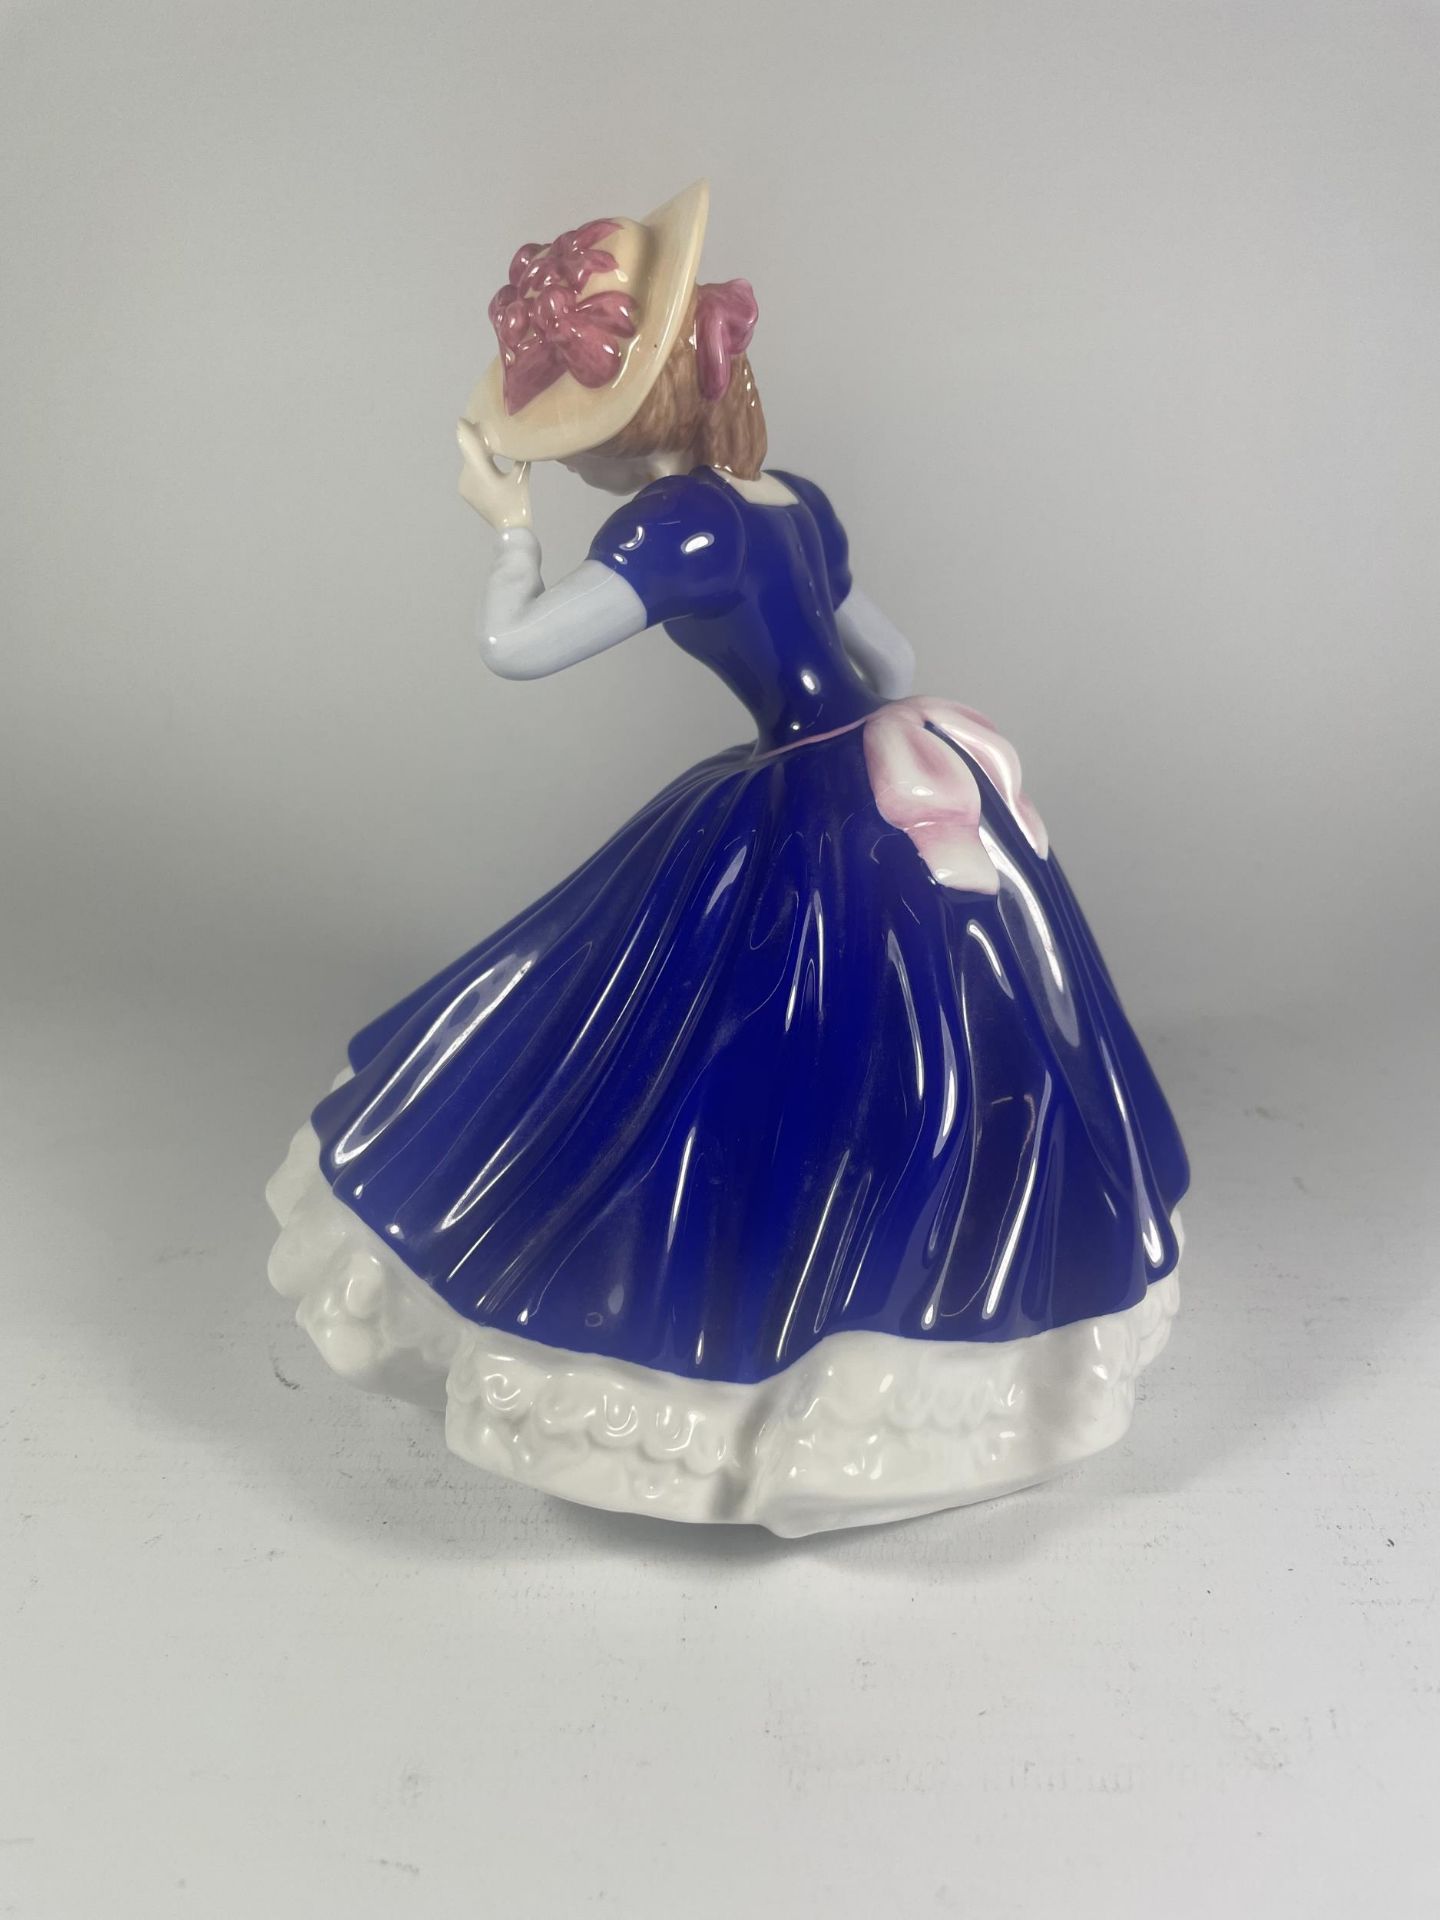 A ROYAL DOULTON FIGURE OF THE YEAR 2006 MARY FIGURE - Image 2 of 5